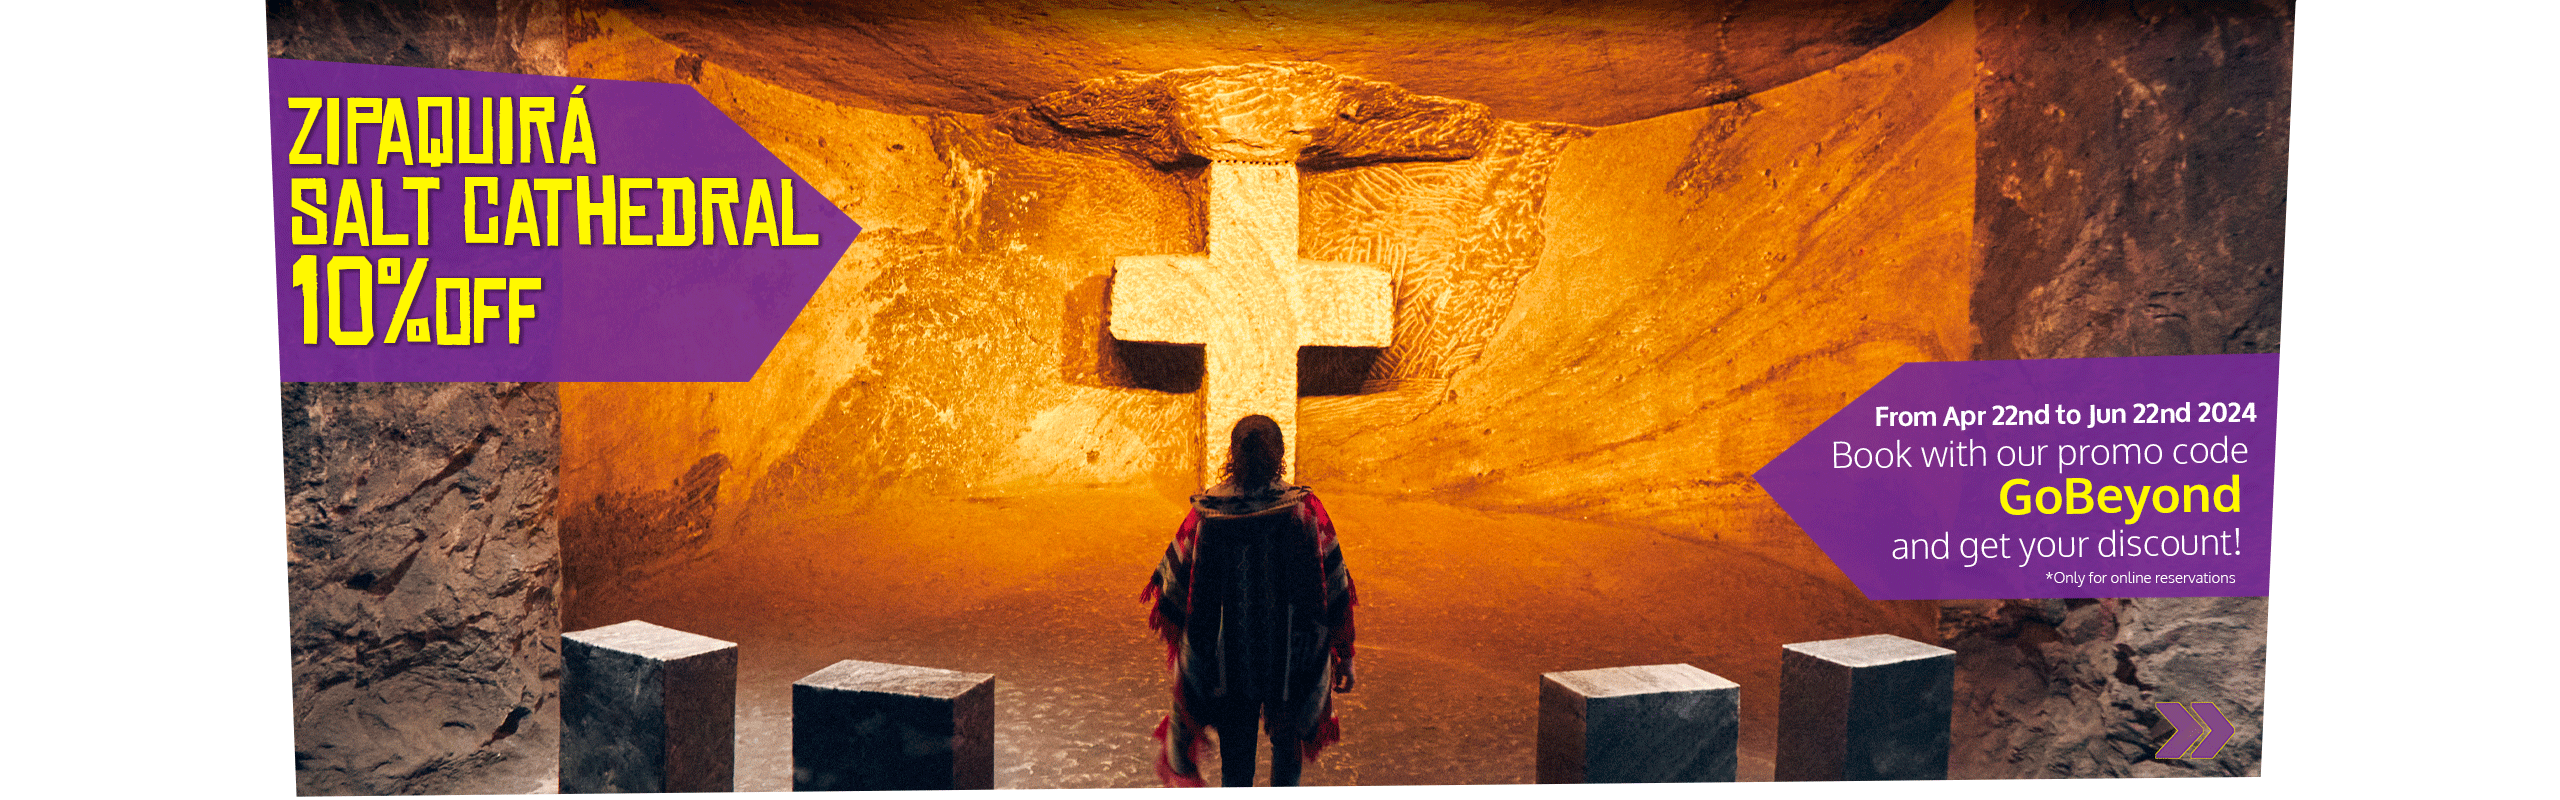 Beyond Colombia Tours | Tour: Zipaquira Salt Cathedral Tour